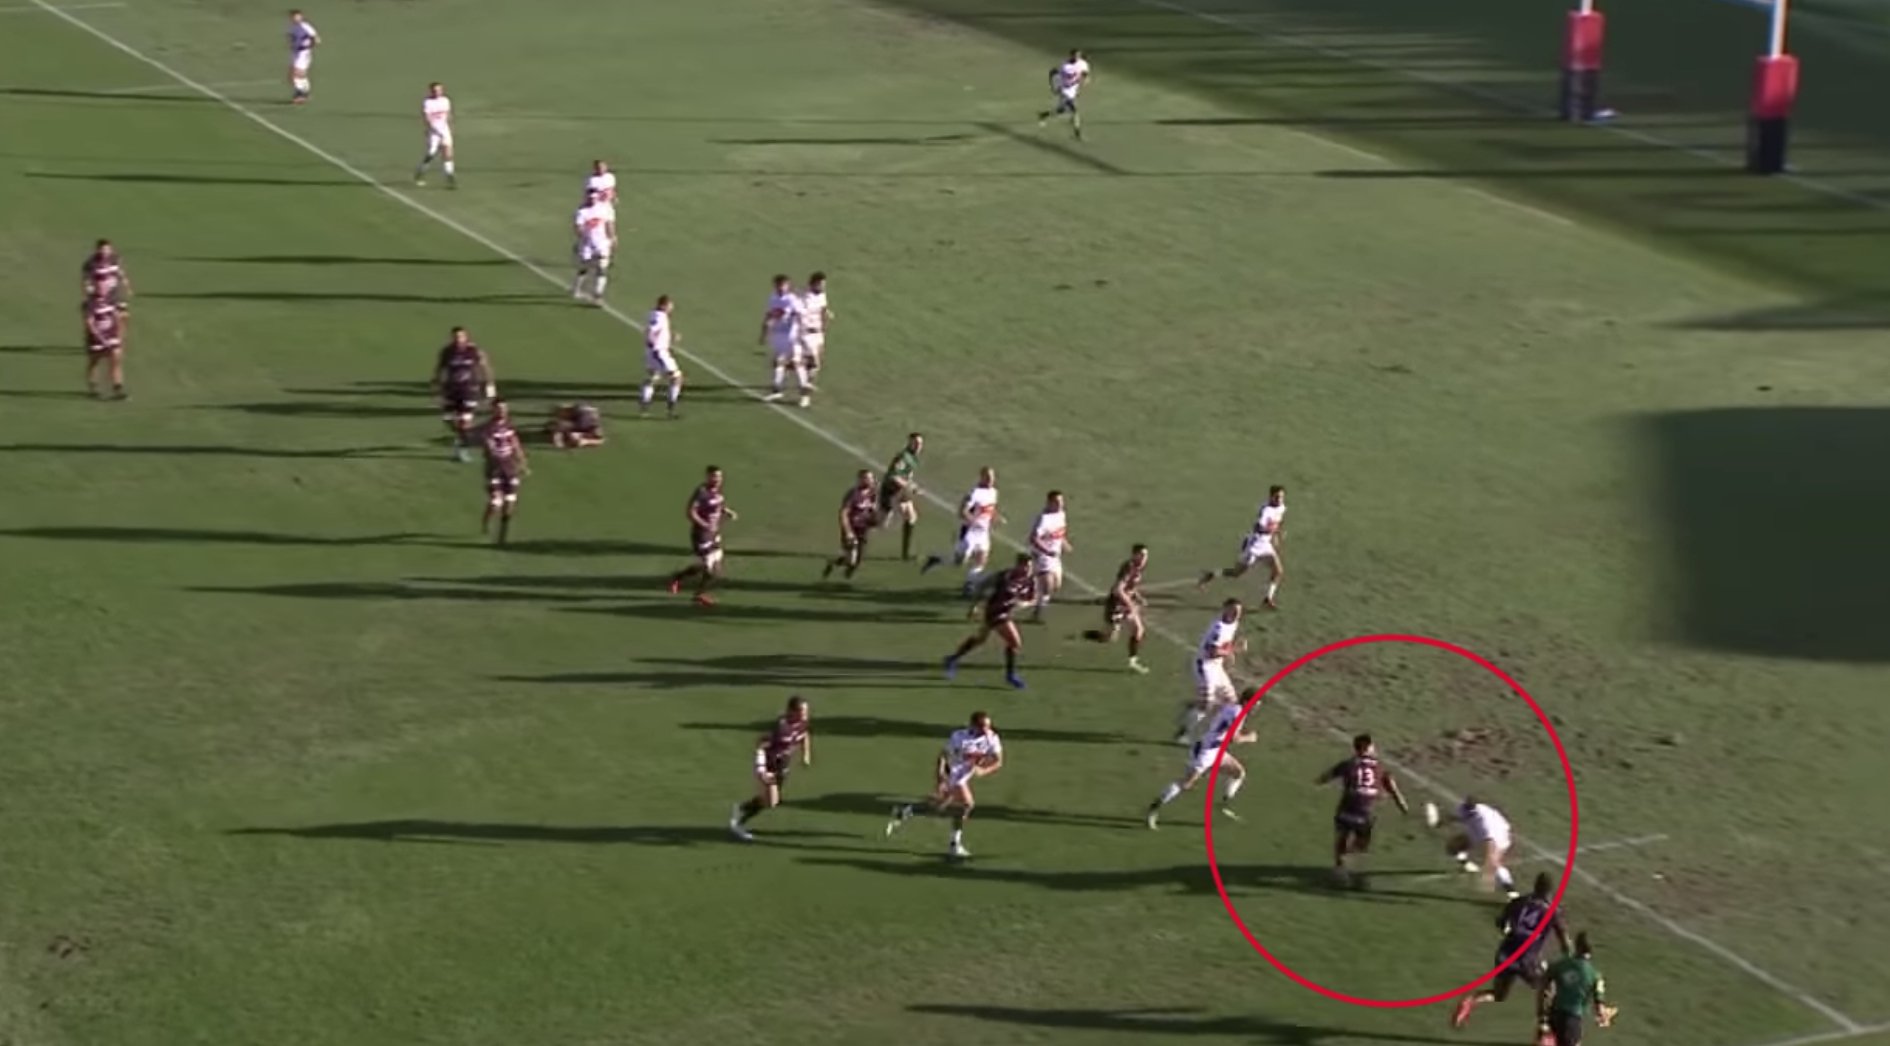 WATCH: Fekitoa nearing god-mode levels of skill with ANOTHER ridiculous pass